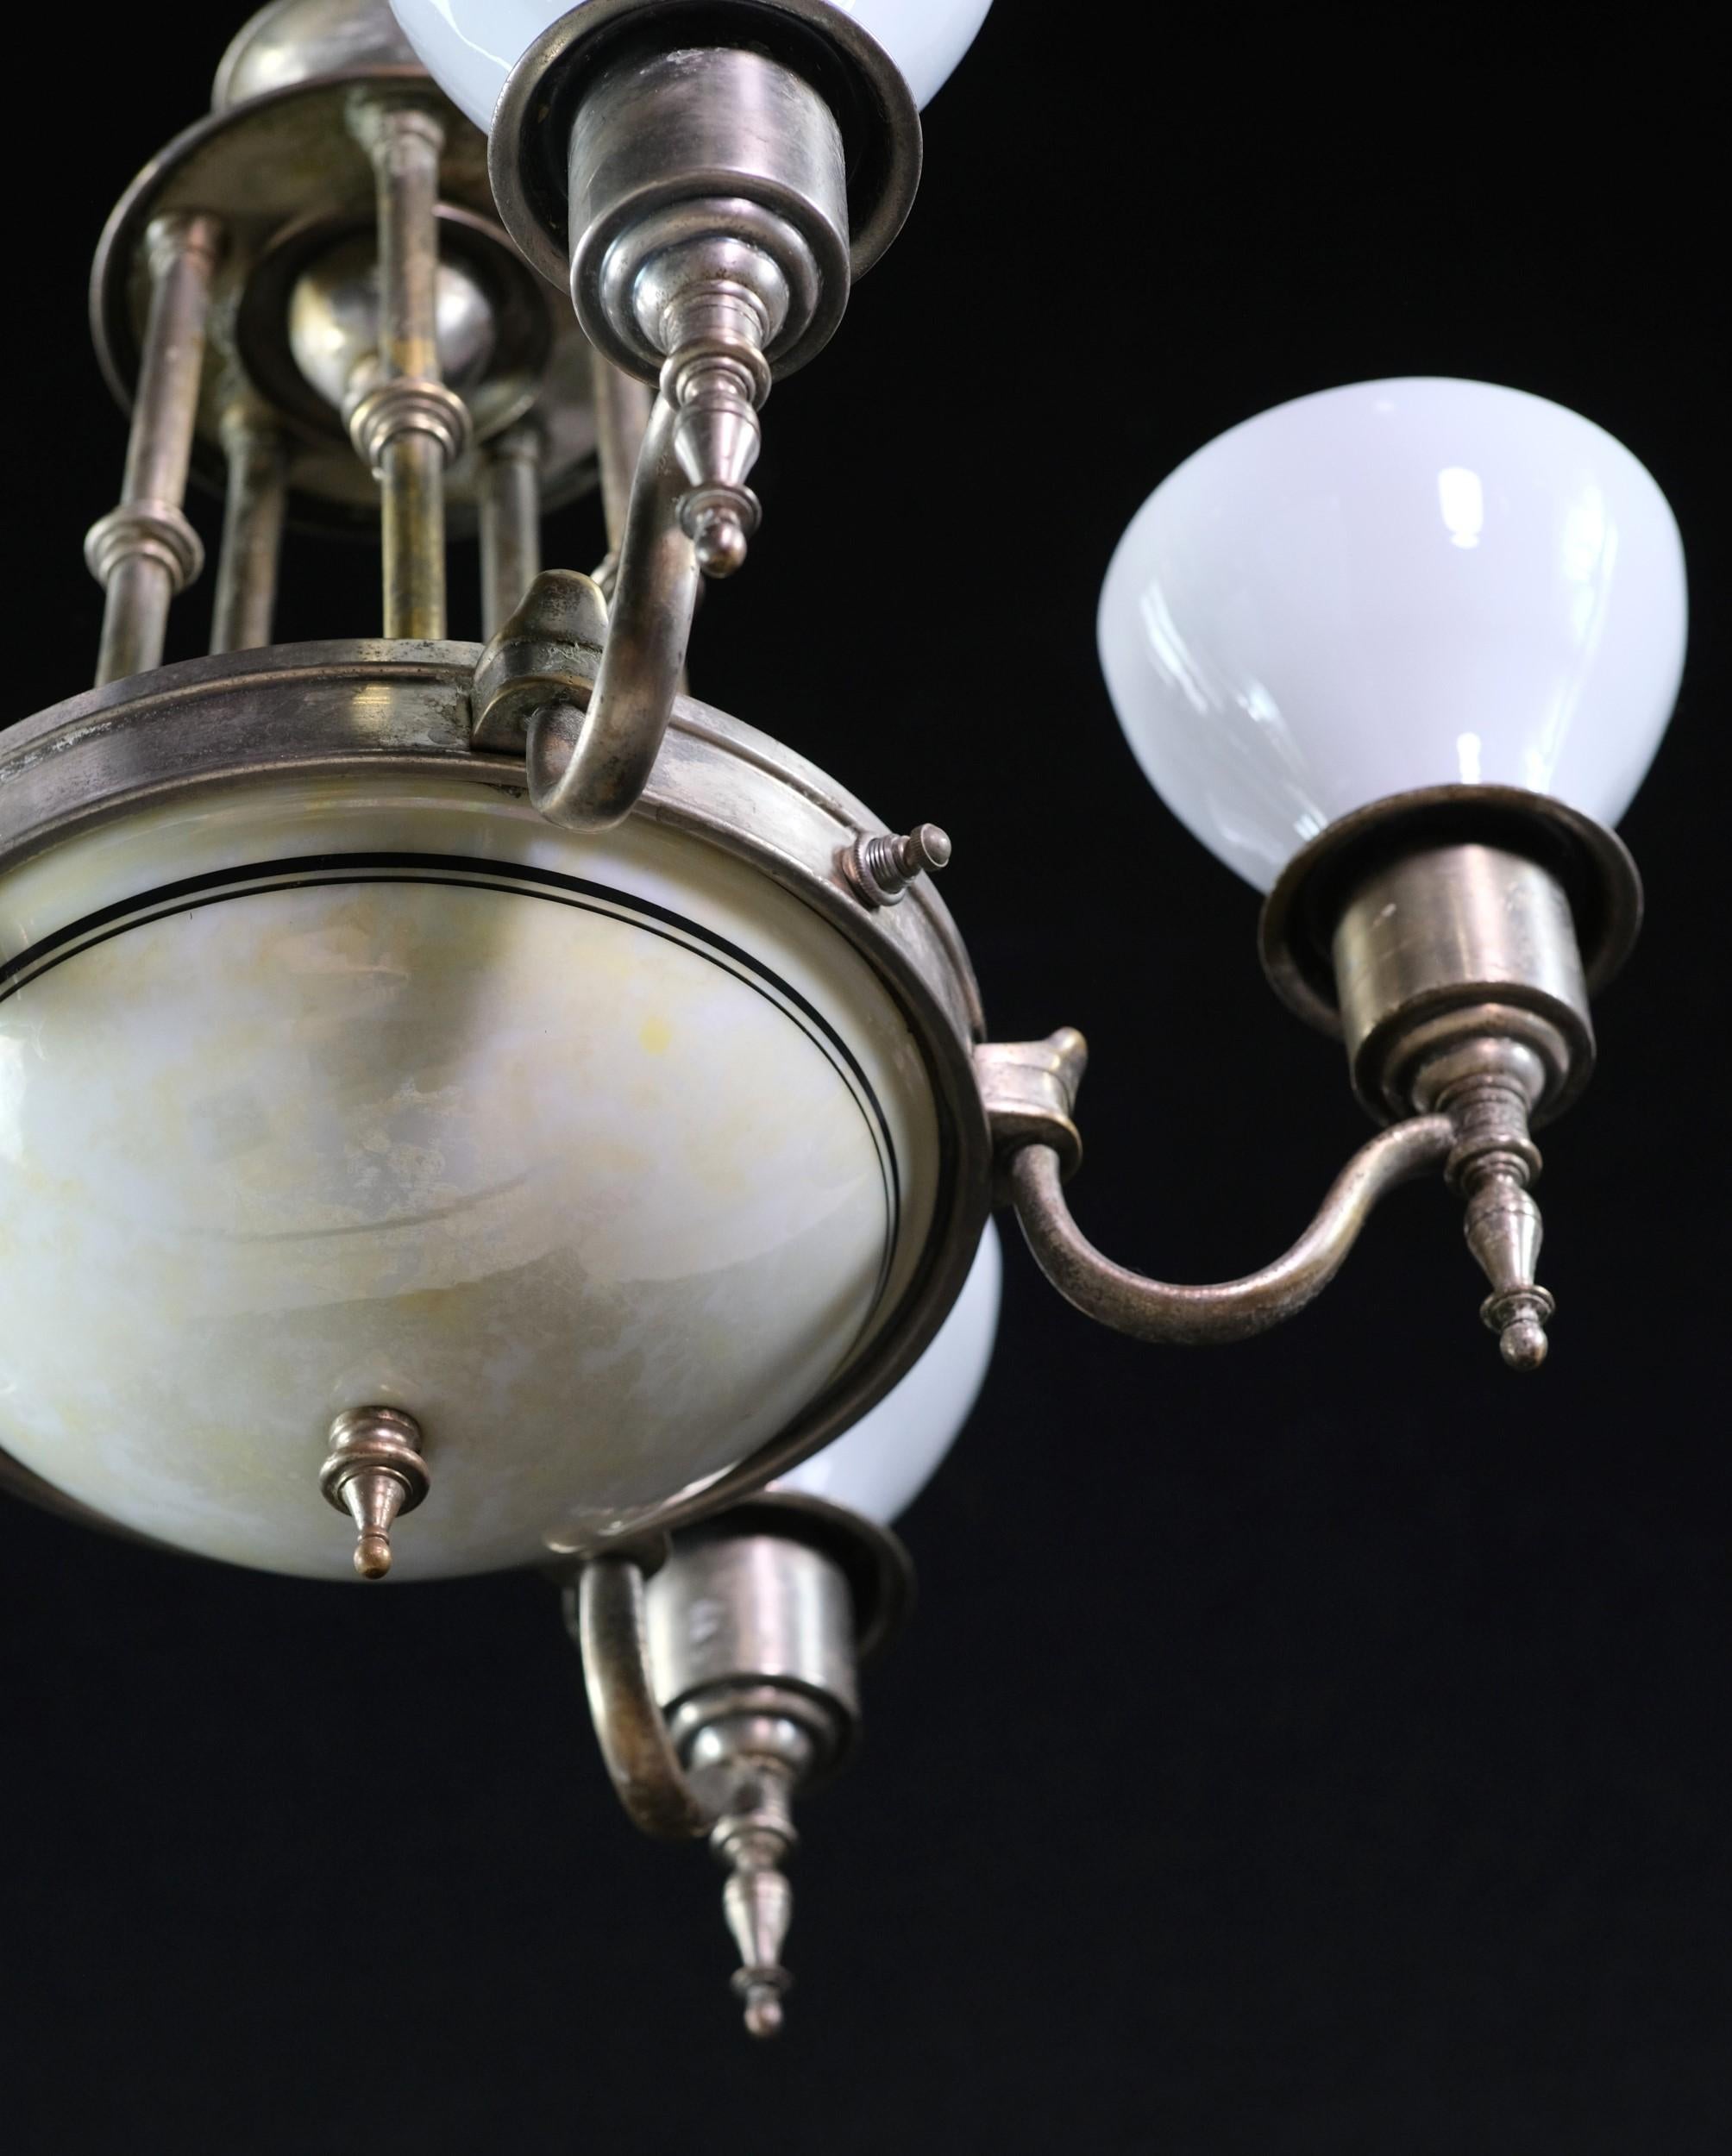 American Classical 1930s Nickel-Plated 5-Arm Chandelier W/ Milk Glass Shades & Bottom Dish Light